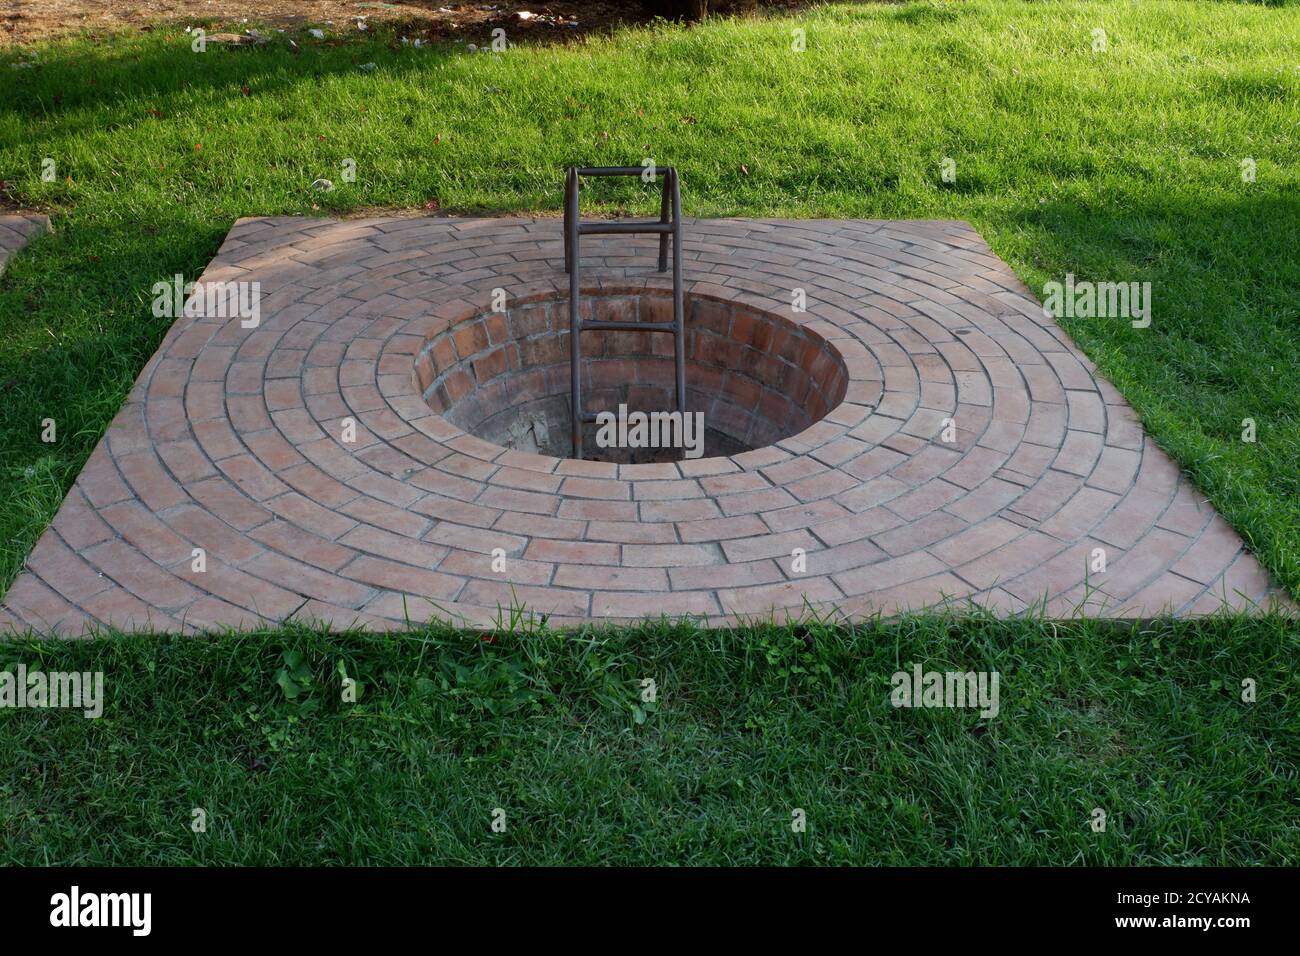 Manhole with ladder in garden.  (Not a real manhole, designed in garden as an artistic object) Stock Photo